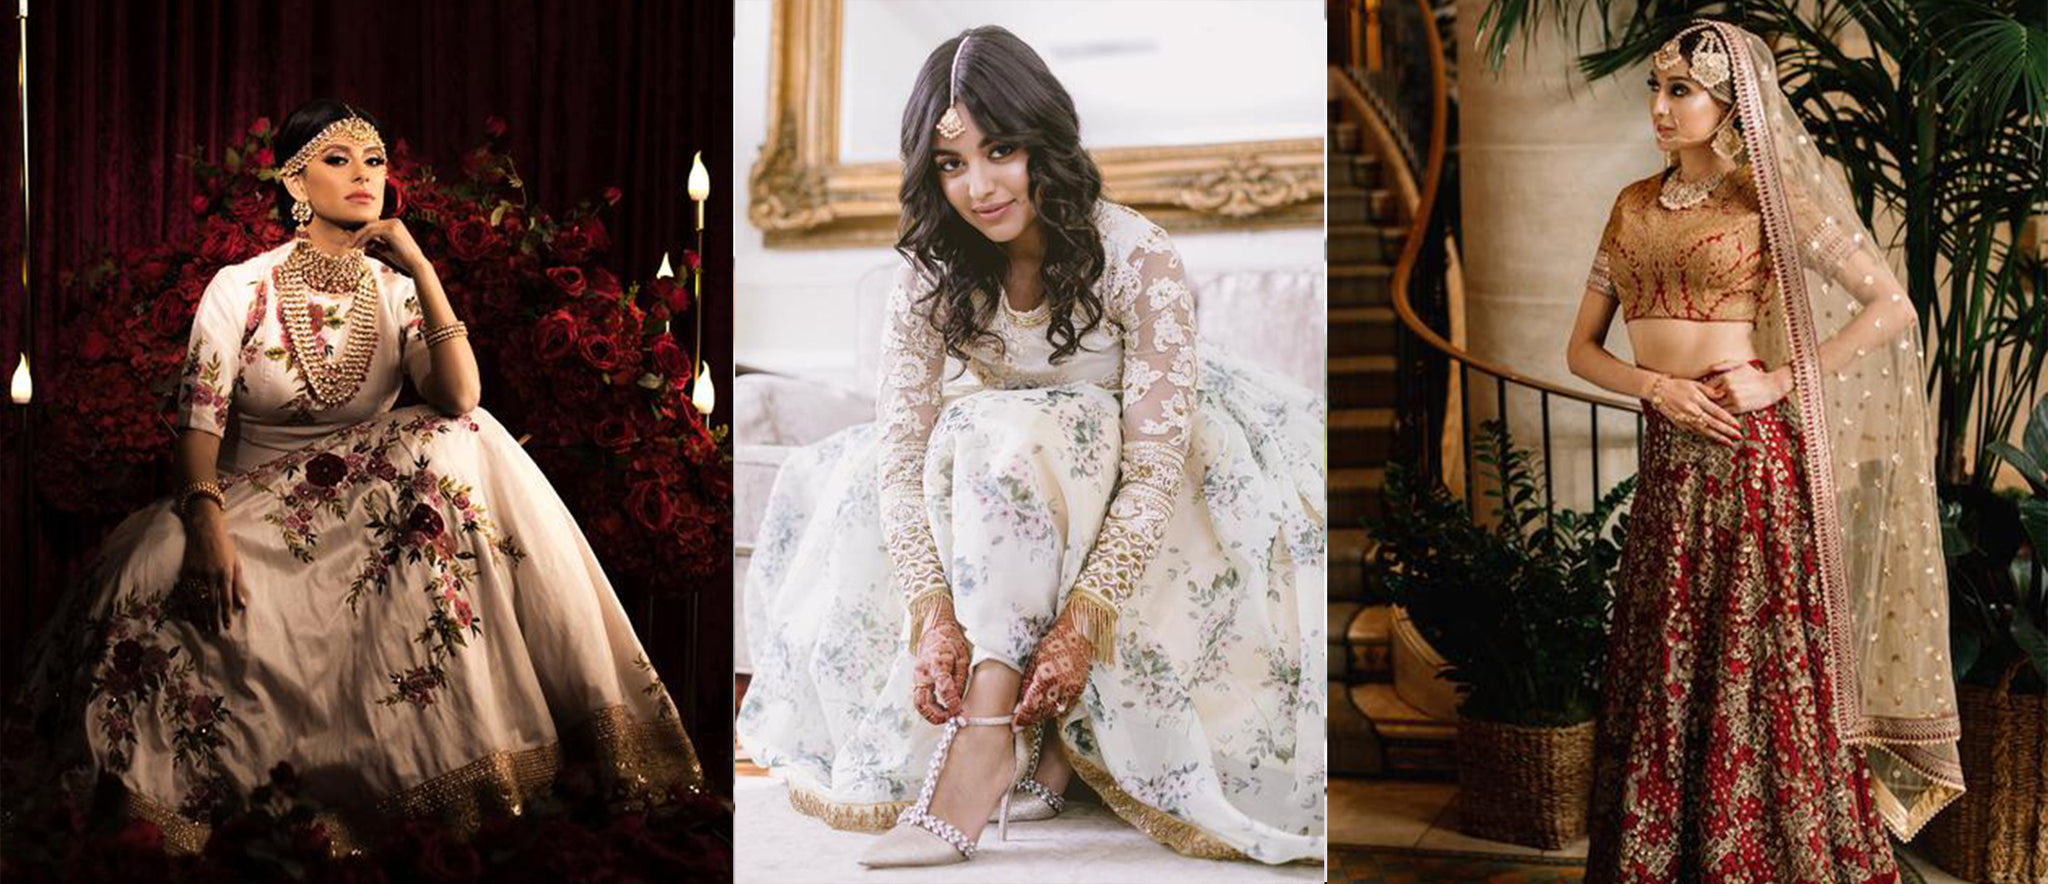 Ditch the dress - join the jumpsuit bride tribe! - English Wedding